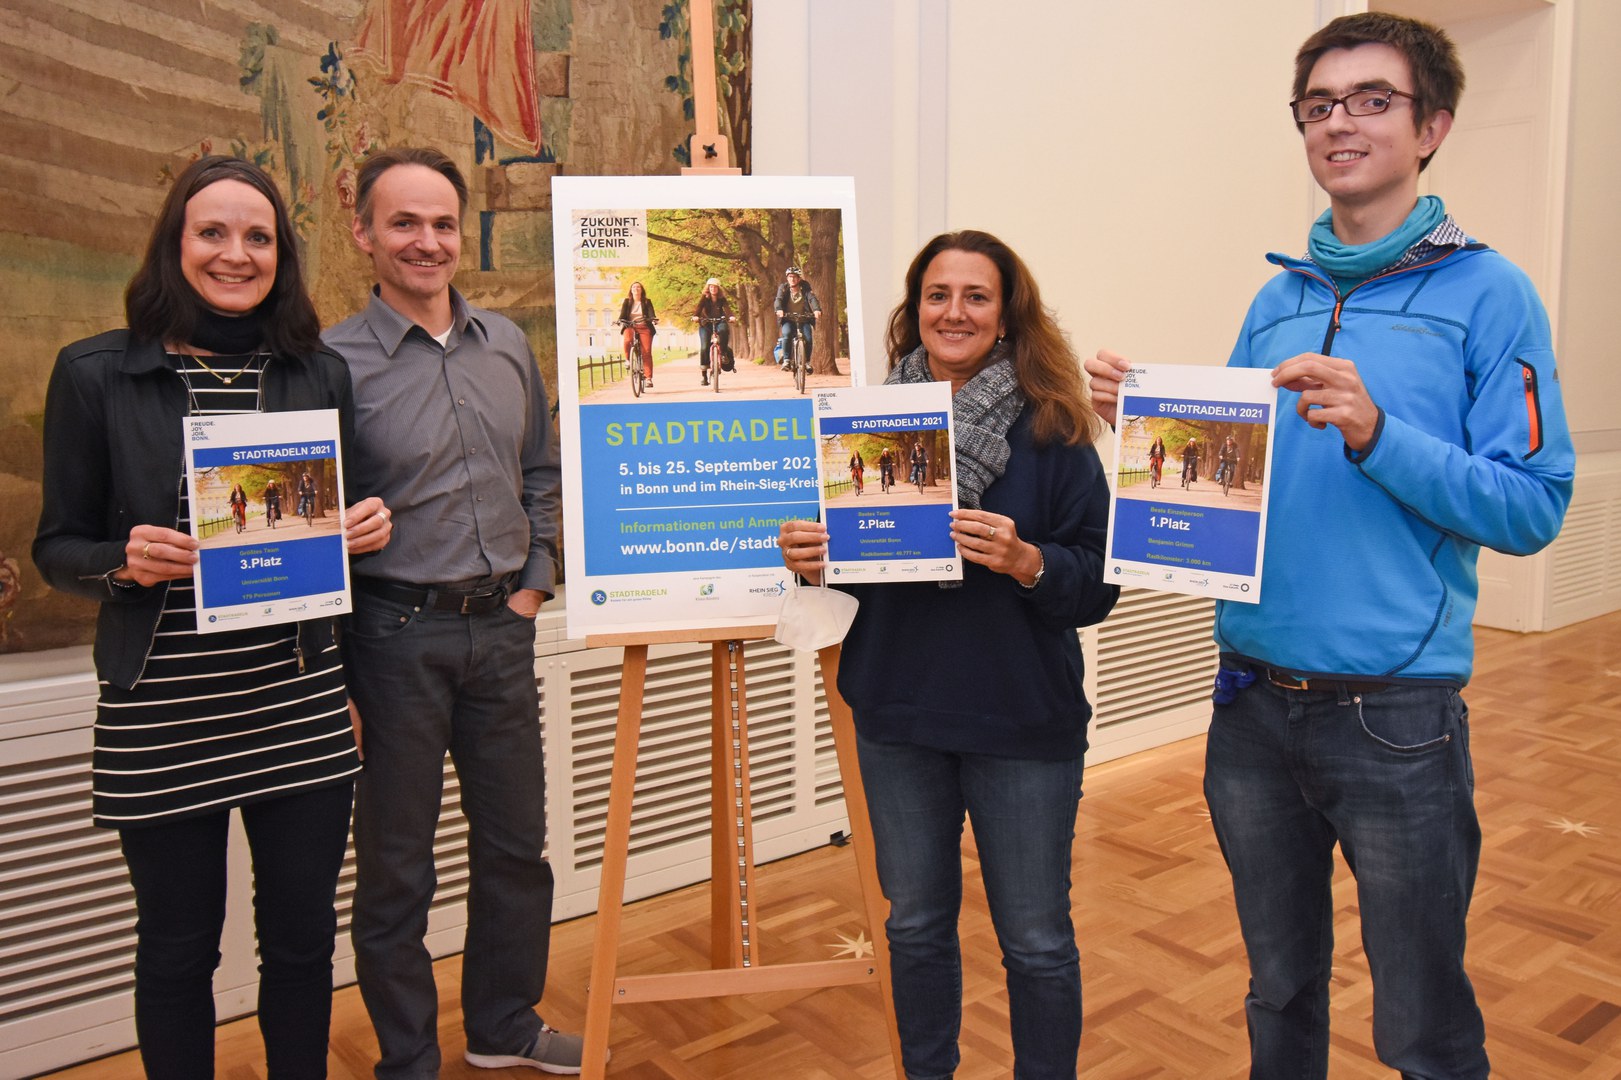 The awarding of certificates to the team of the University of Bonn